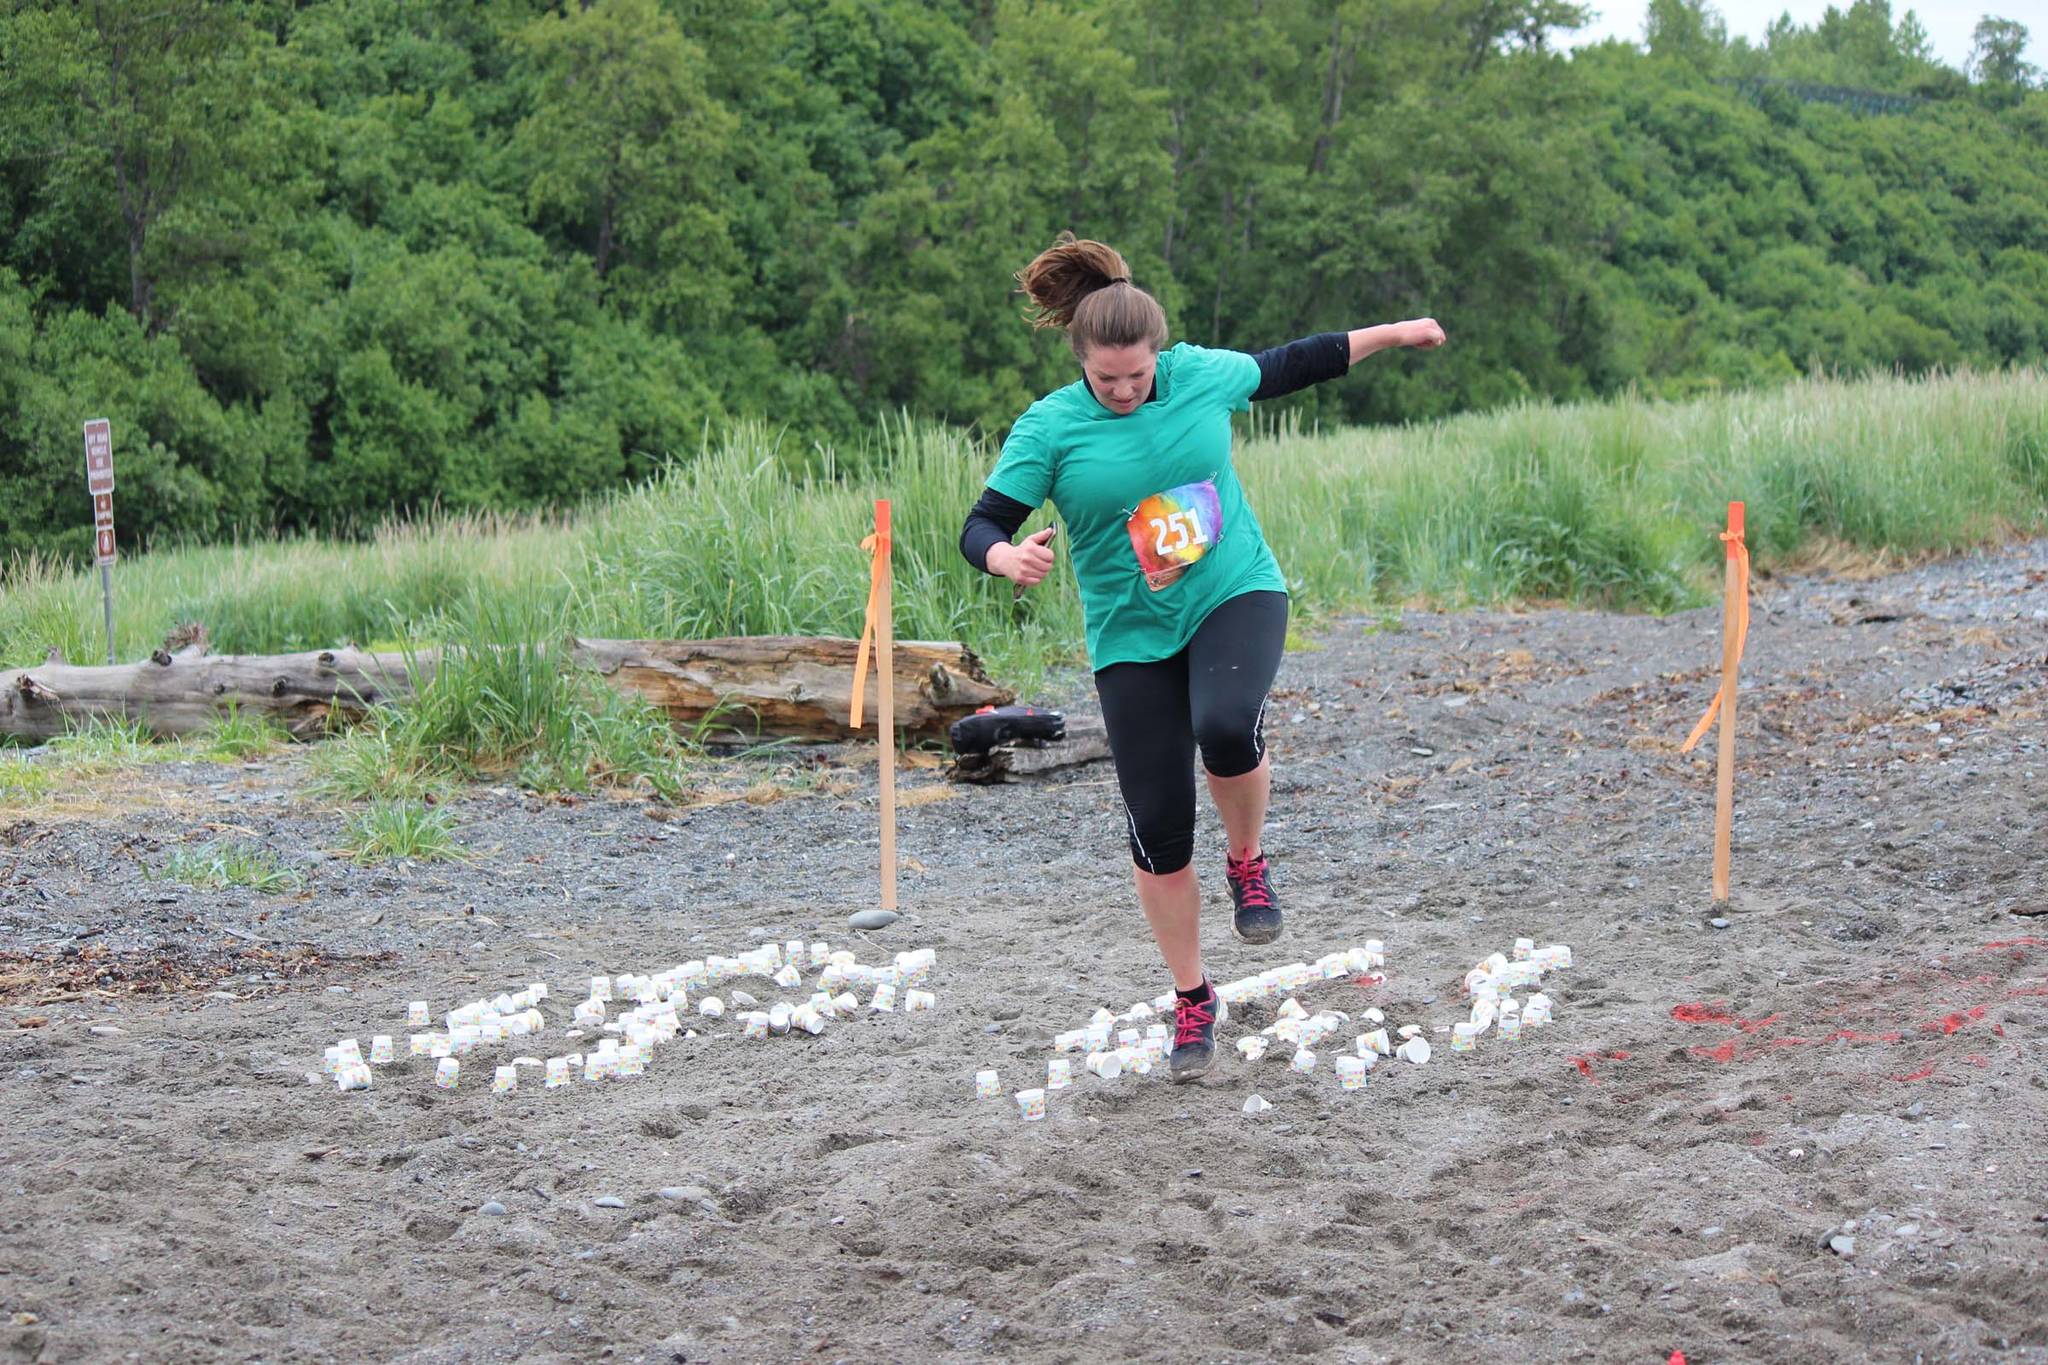 Danielle Harrison, 251, navigates through a sandy hopscotch course, one of several challenges added to the 5K fun run, the Clam Scramble held Saturday, June 15, 2019 in Ninilchik, Alaska. (Photo by McKibben Jackinsky)